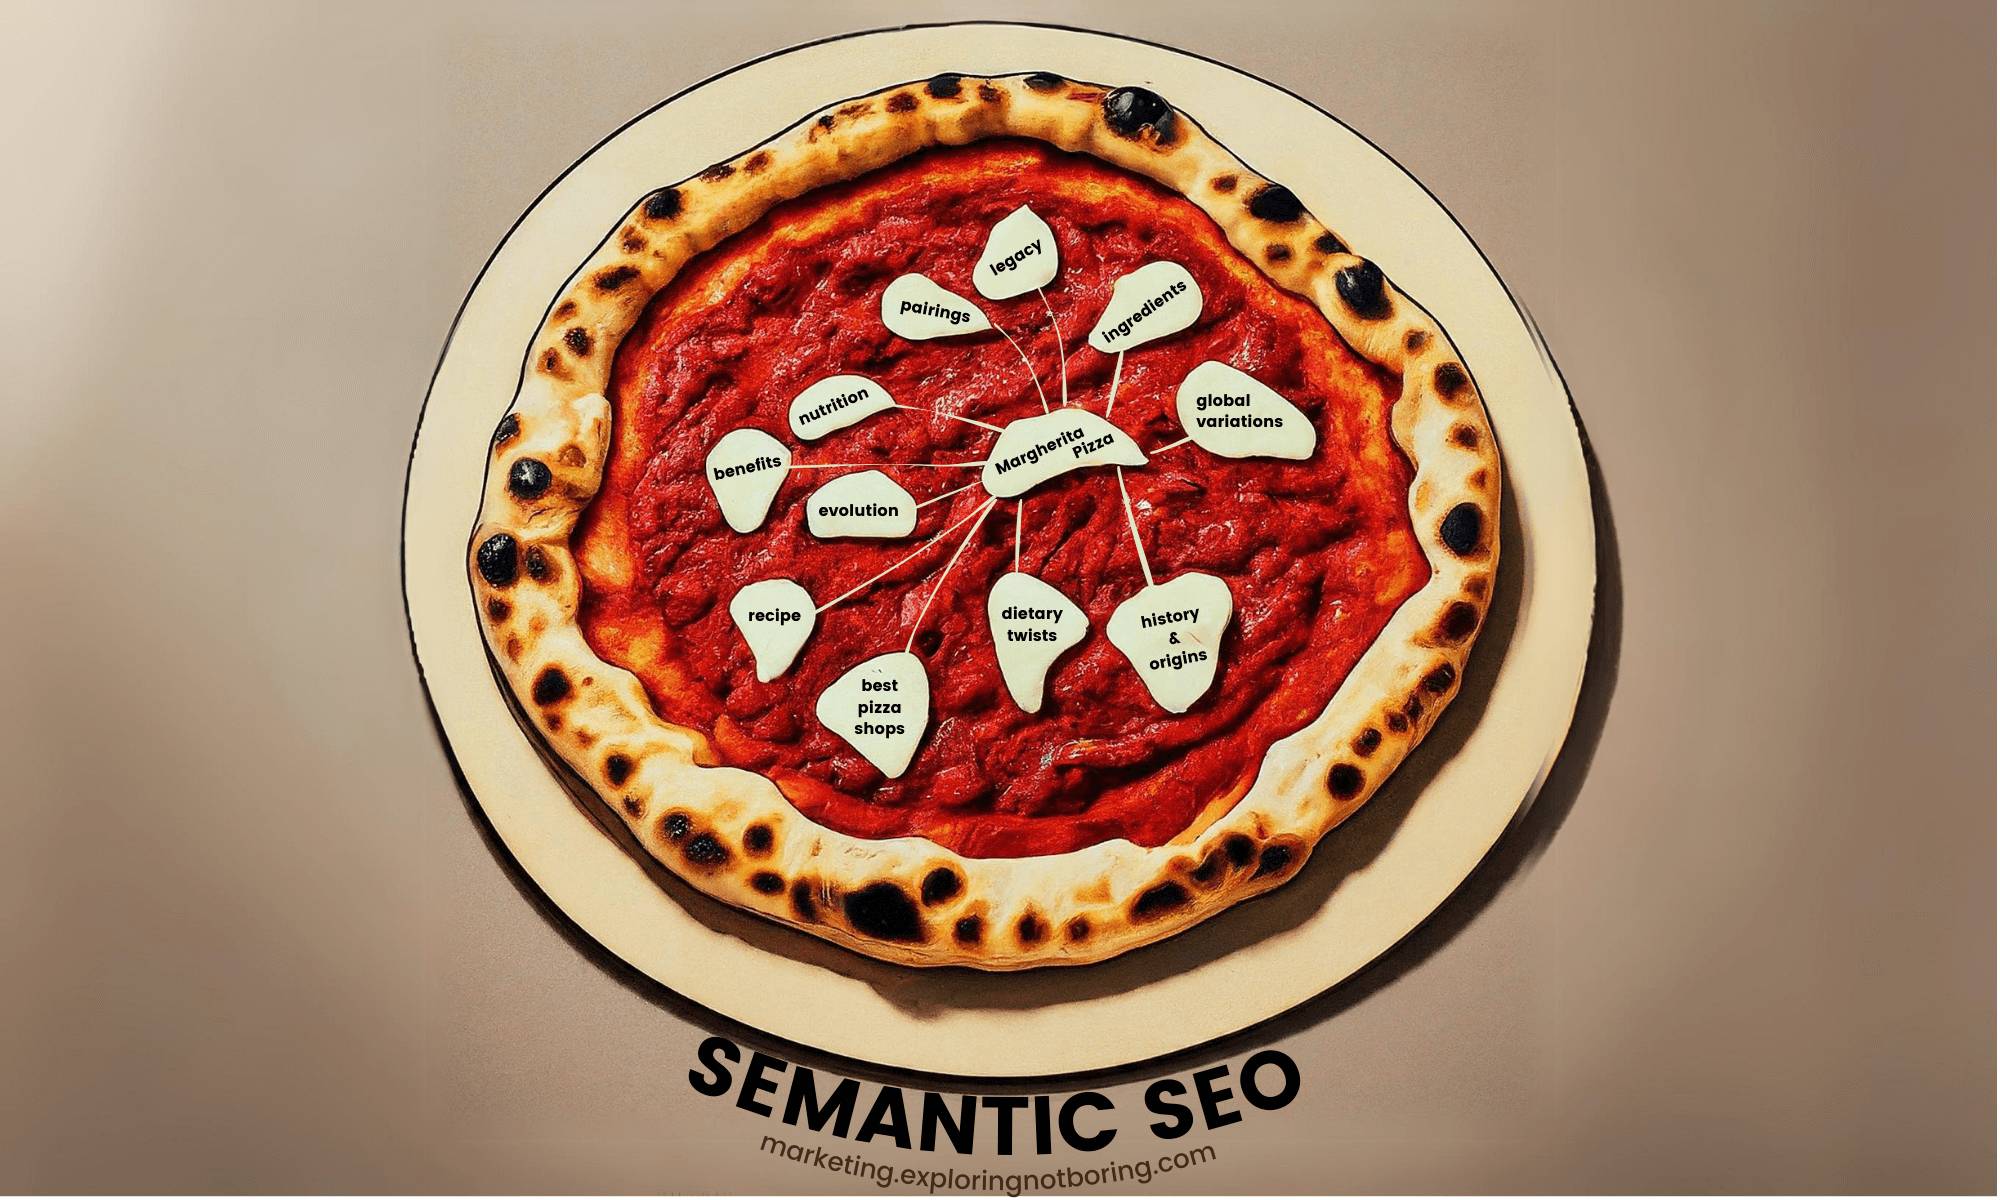 Graphic of a cartoon pizza, a mix of realism and cartoon. On the pizza is mozzarella diagramming semantic SEO. In the middle is Margherita Pizza, and surrounding this pillar of mozzarella is a variety of related topics about this Neapolitan style of pizza: ingredients, legacy, pairings, nutrition, benefits, recipe, evolution, best pizza shops, dietary twists, history & origins, global variations, and so on. Representing one of the Top Digital Marketing Strategies for Local Businesses in 2024